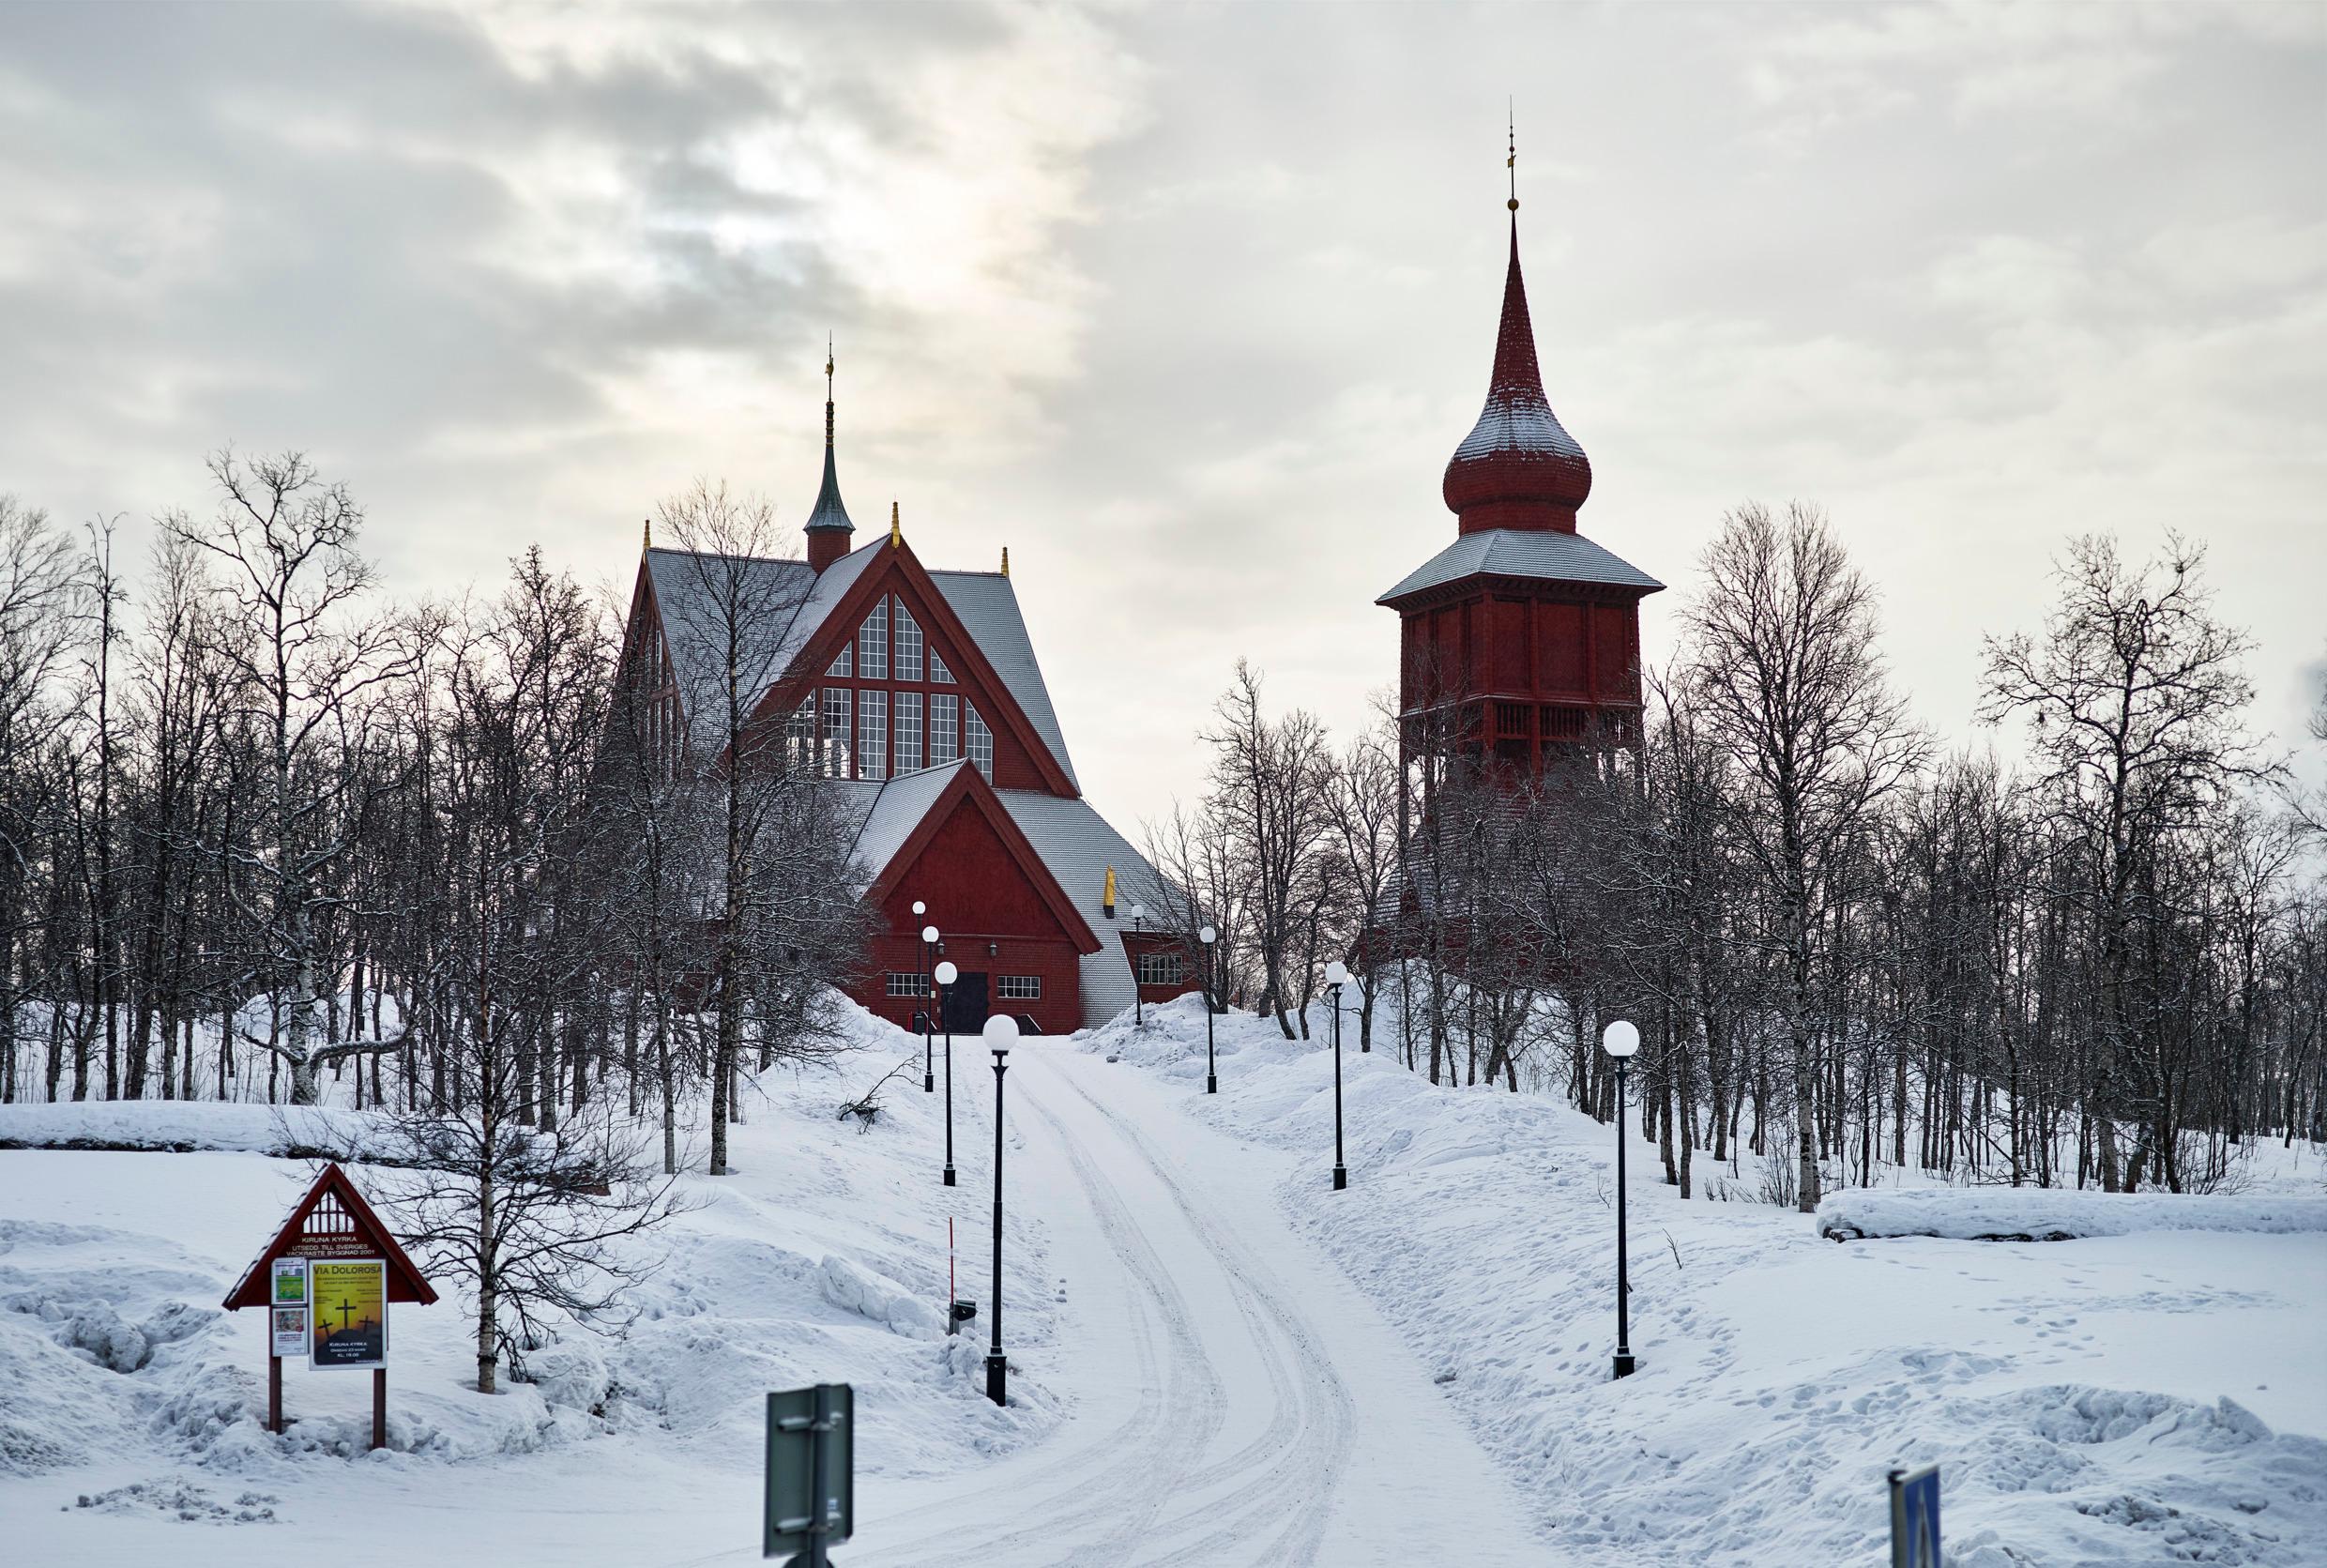 The Kiruna Church, a wooden building with a separate bell tower, sits on a snow-clad slope.